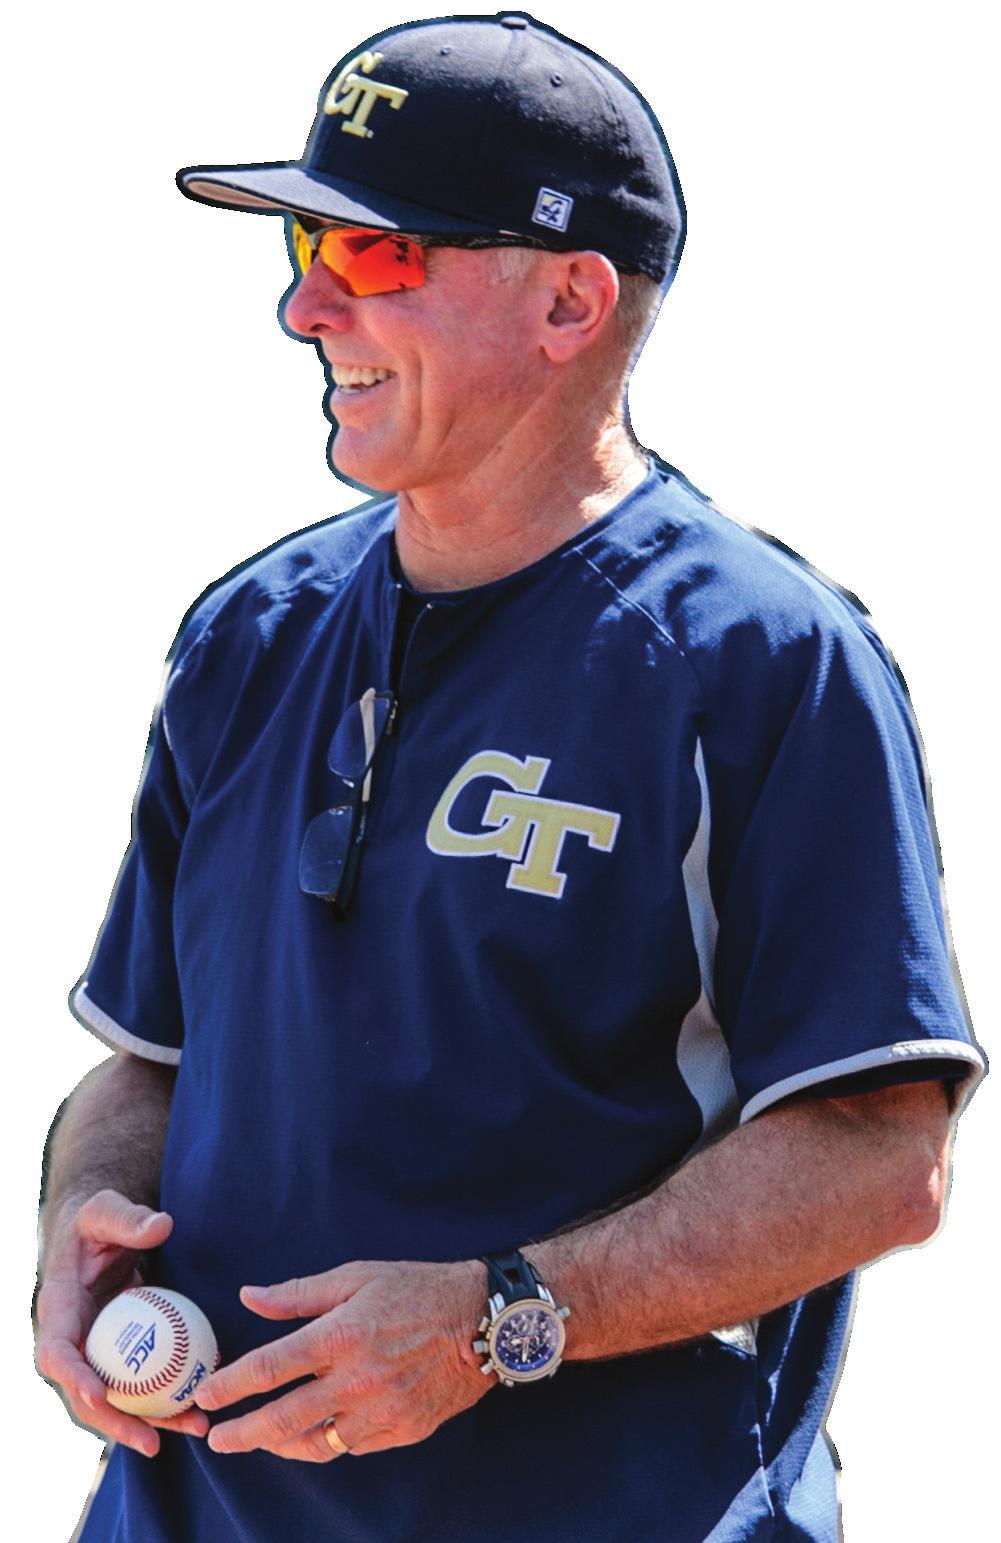 . Hall, who won his 1,100th career game on opening day of the 2015 season and his 900th at Georgia Tech on March 3, 2015 versus Ohio, stands seventh among active Division I coaches in career